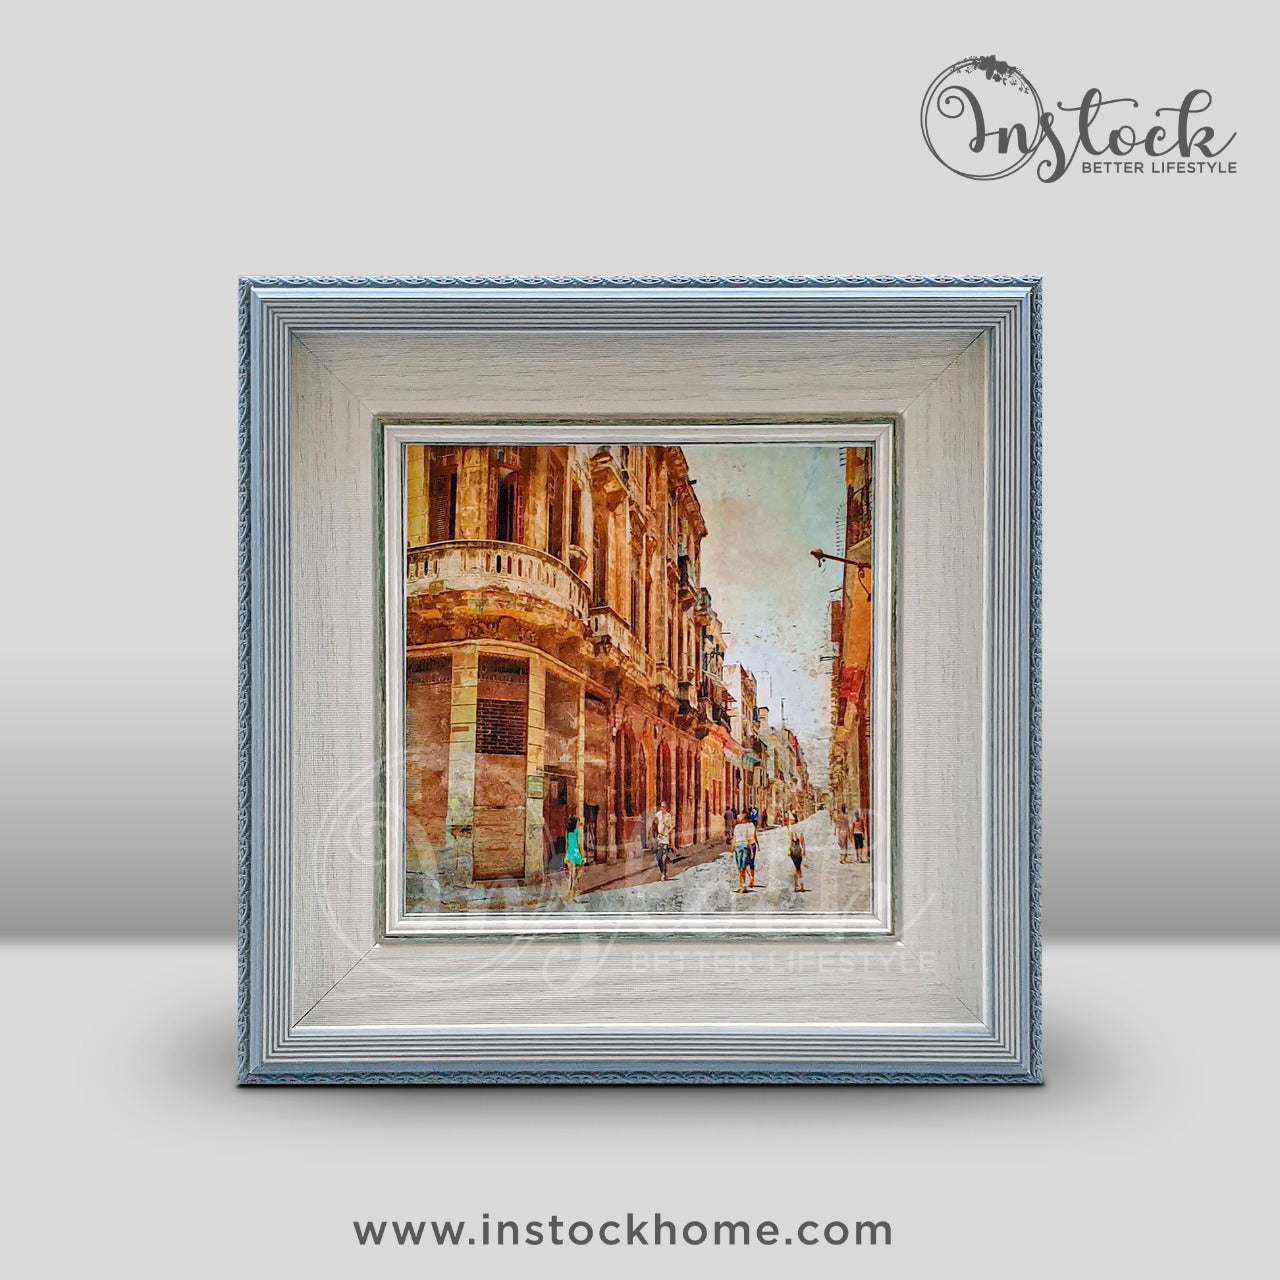 Wooden Frame Scenery - Available In 2 Designs